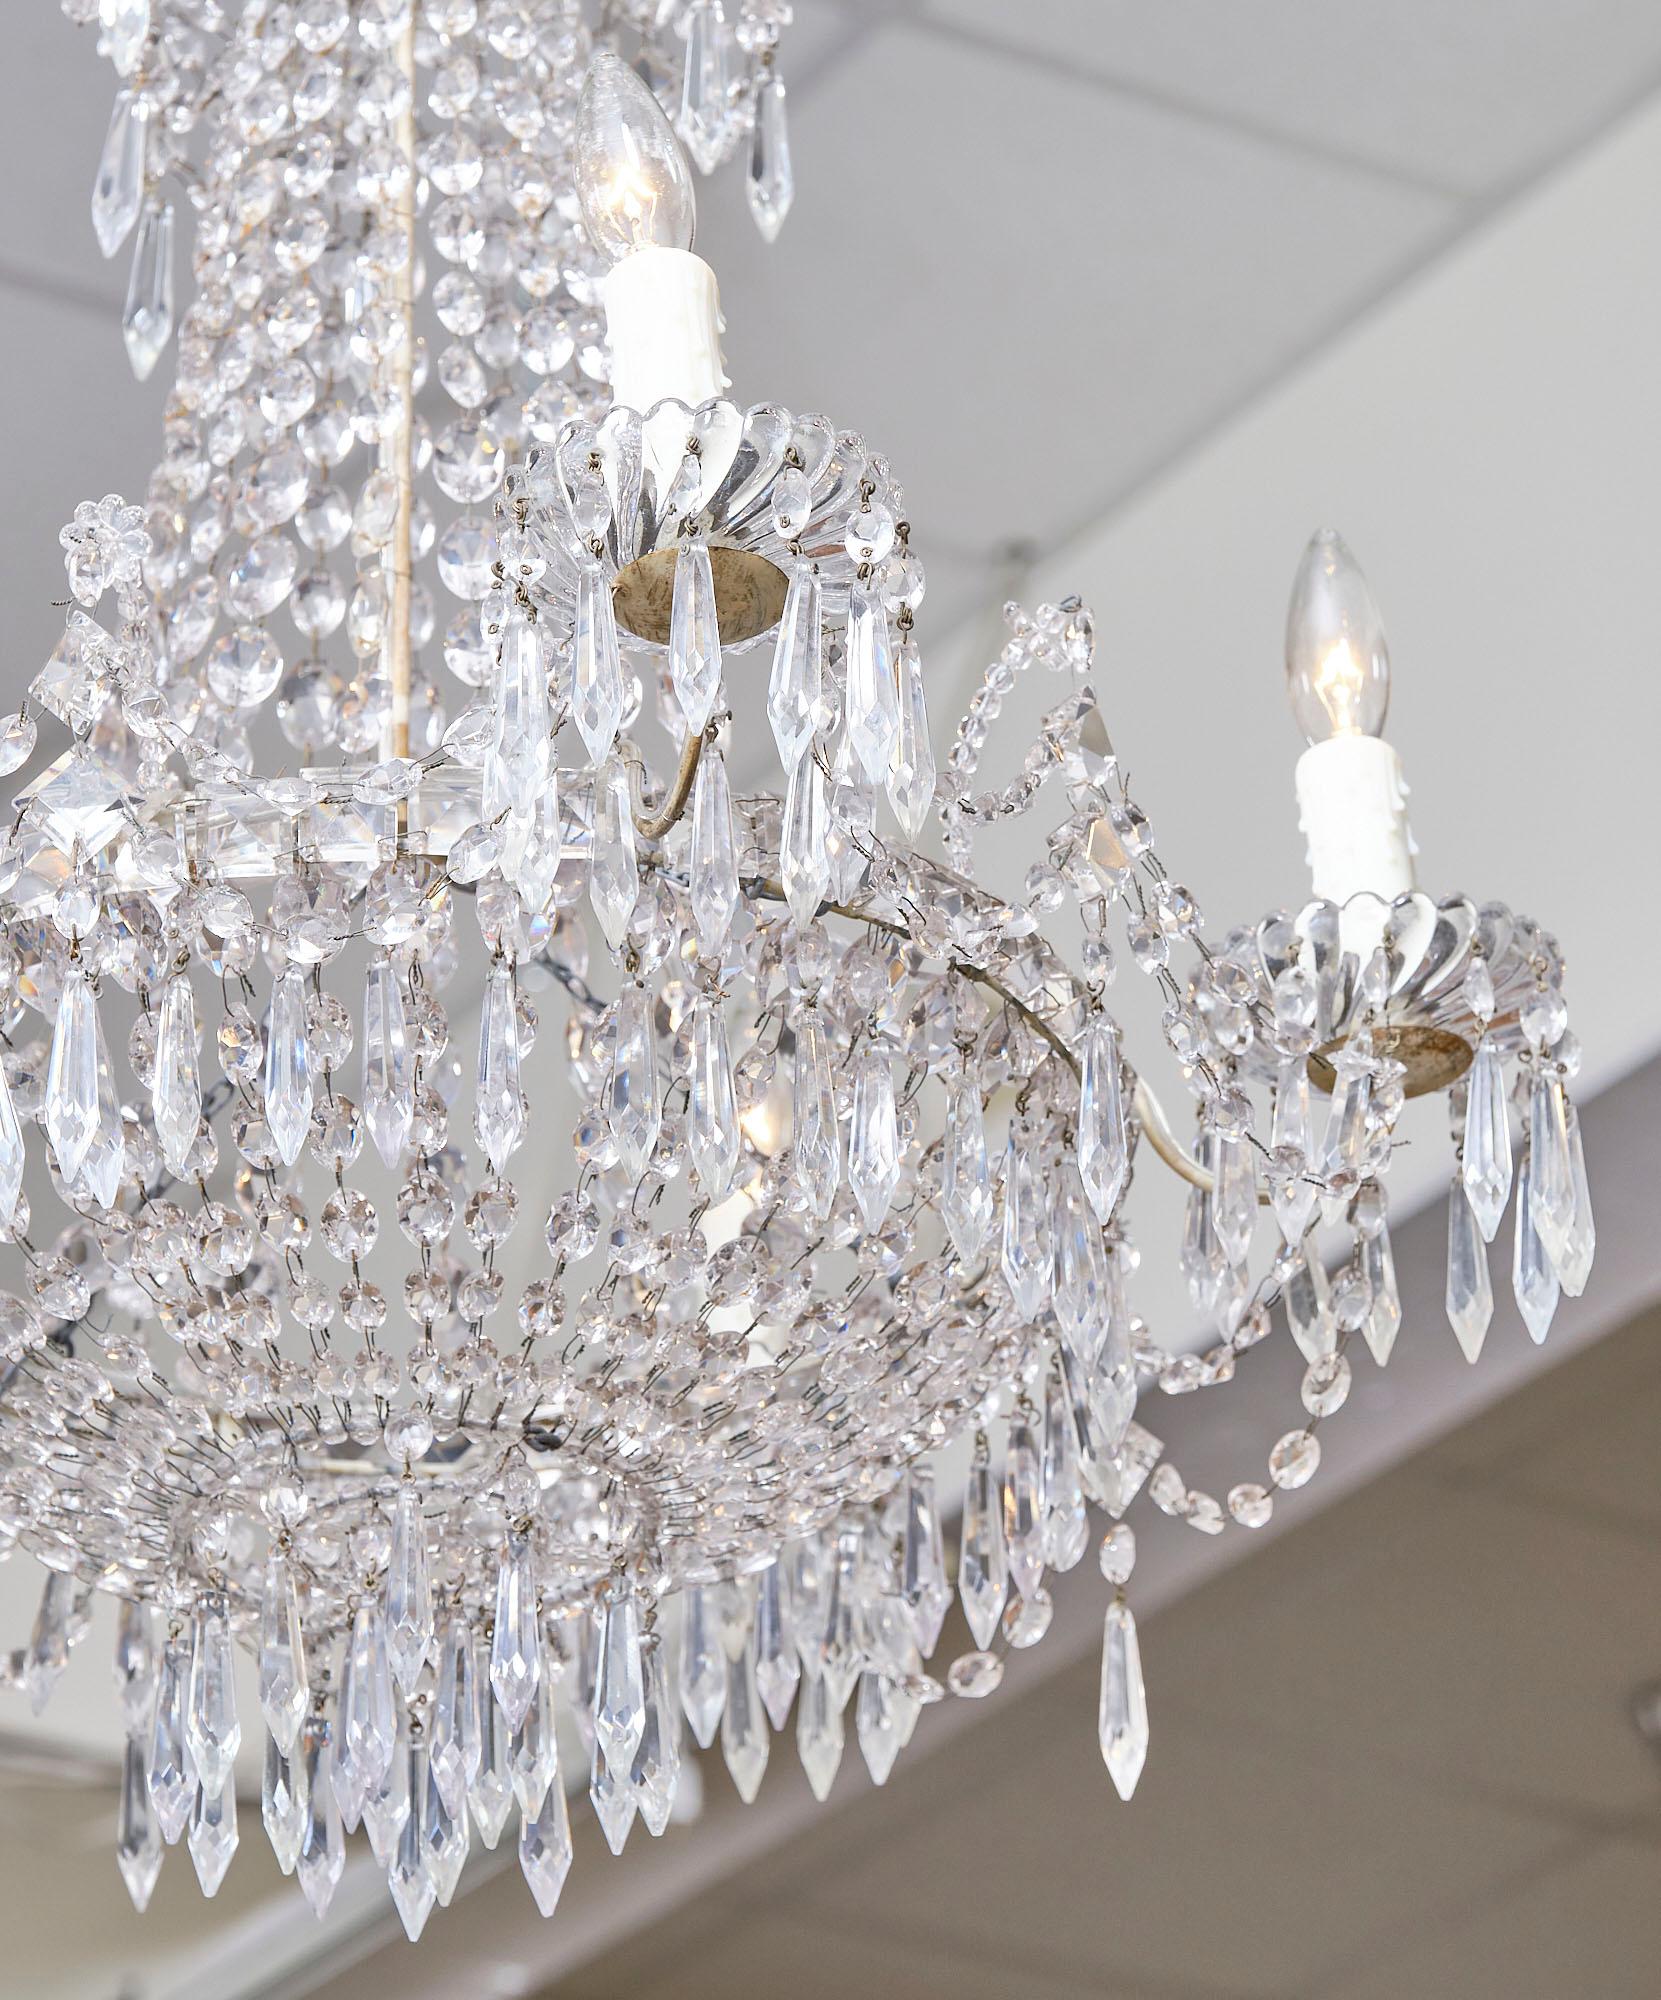 Crystal Antique French Baccarat “Corbeille” Chandelier